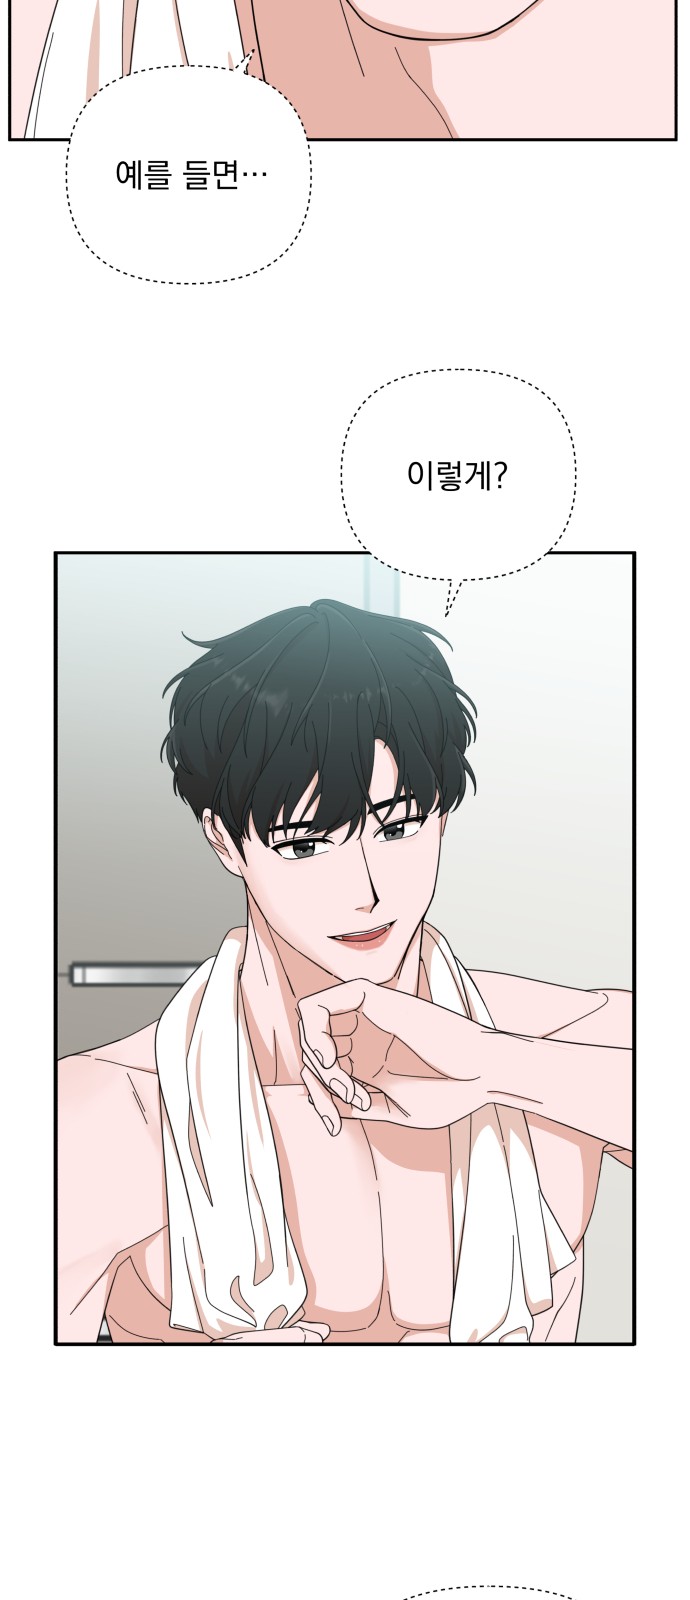 The Man With Pretty Lips - Chapter 9 - Page 2